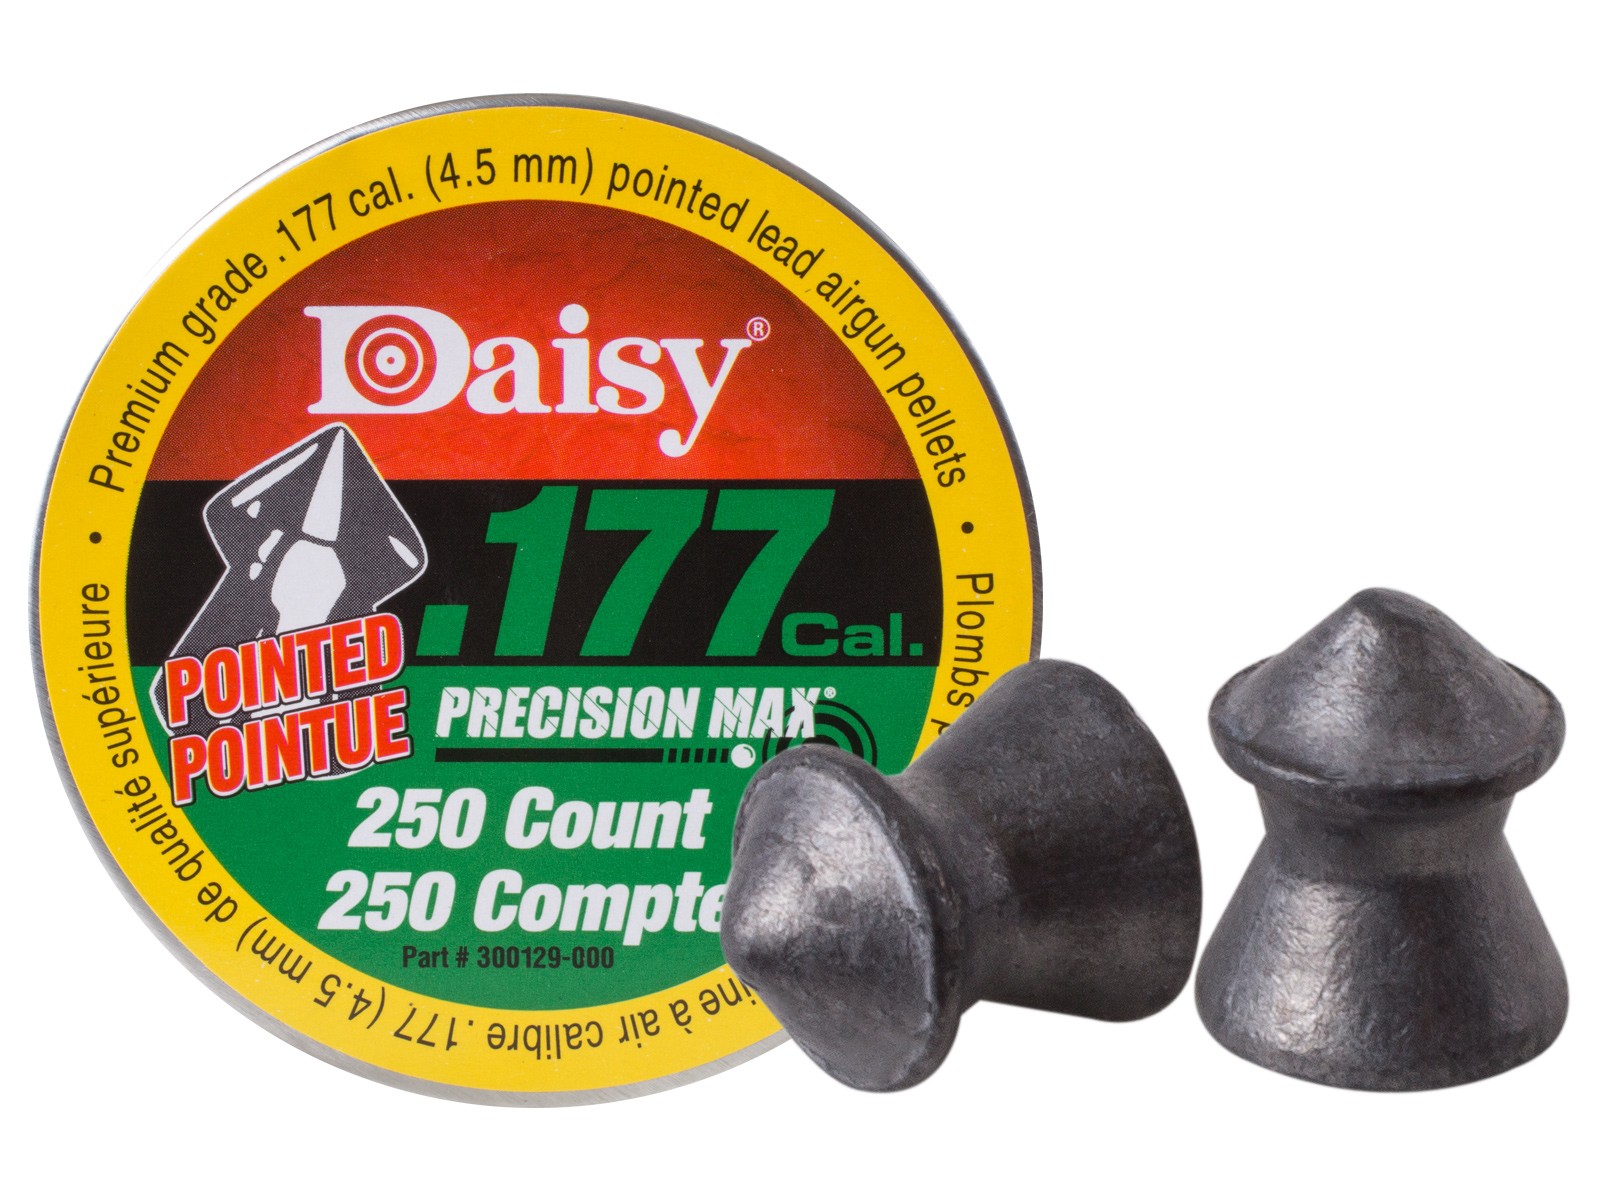 Daisy Precision Max (Pointed) .177 (4.5mm)